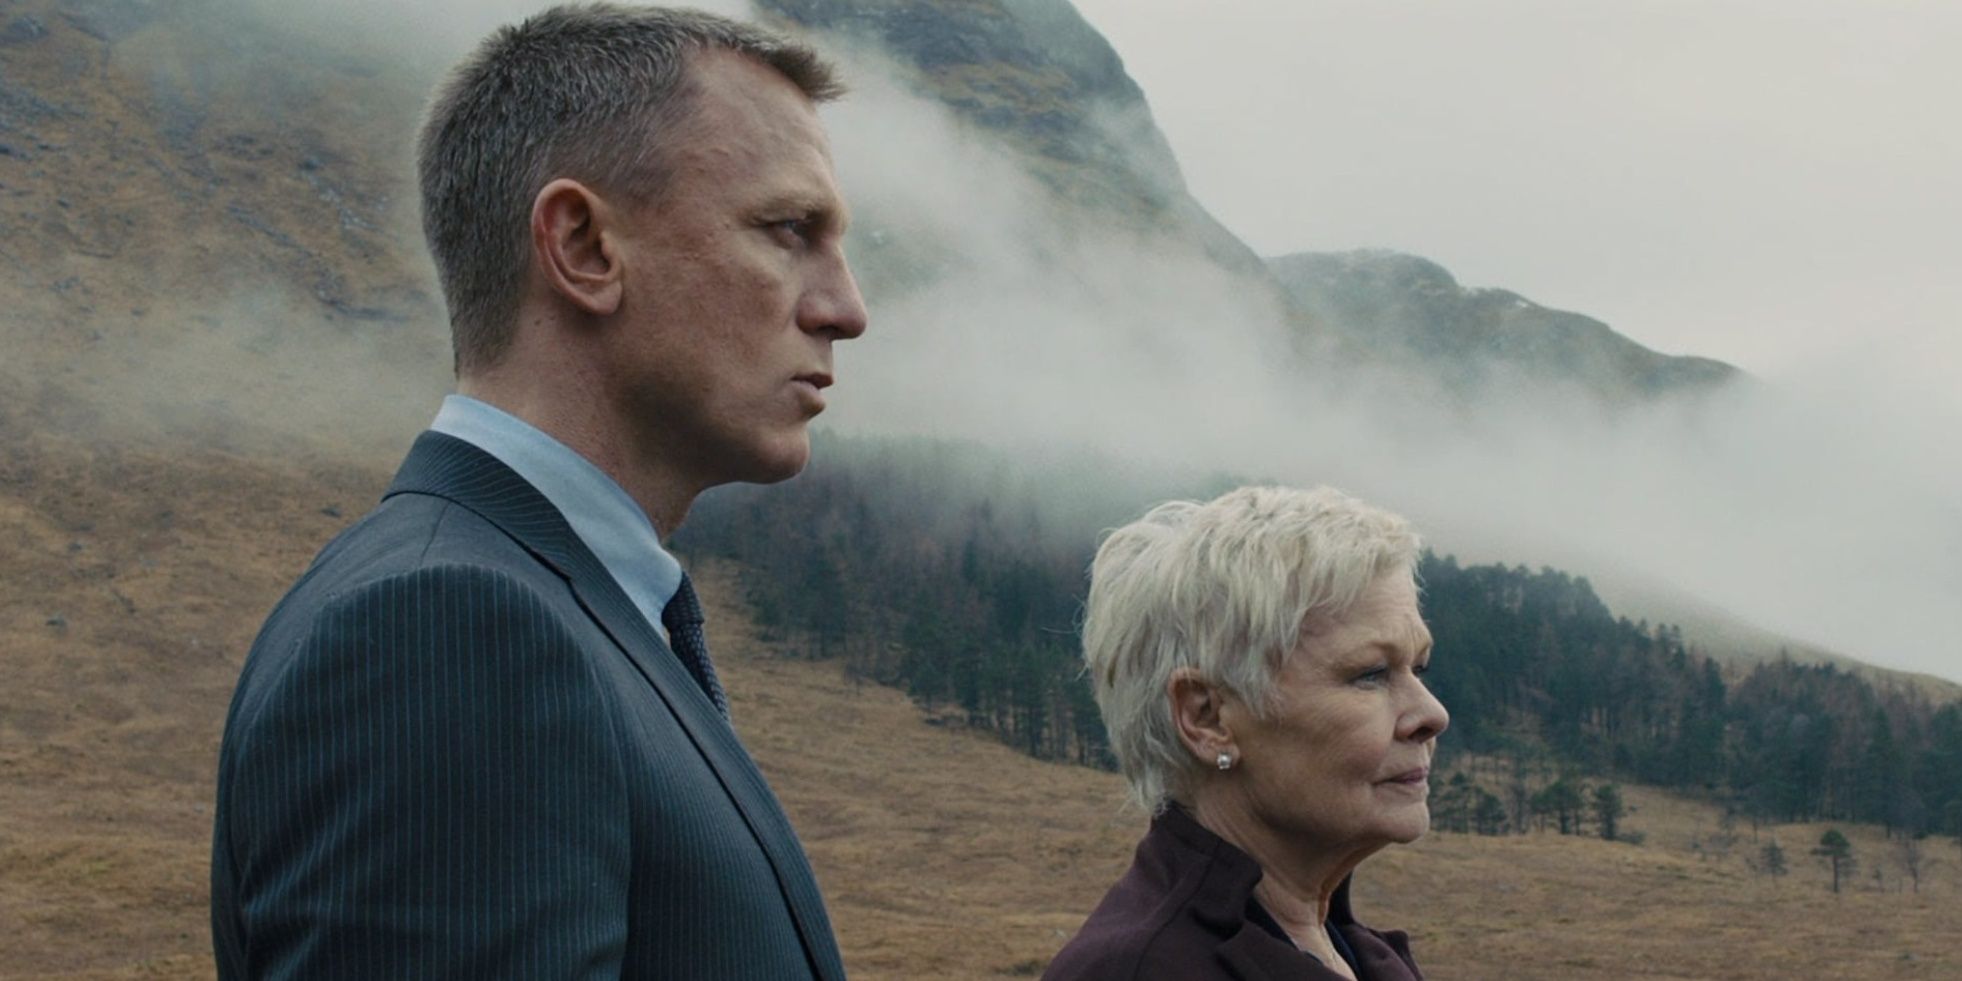 Bond and M stand near his childhood home in Skyfall